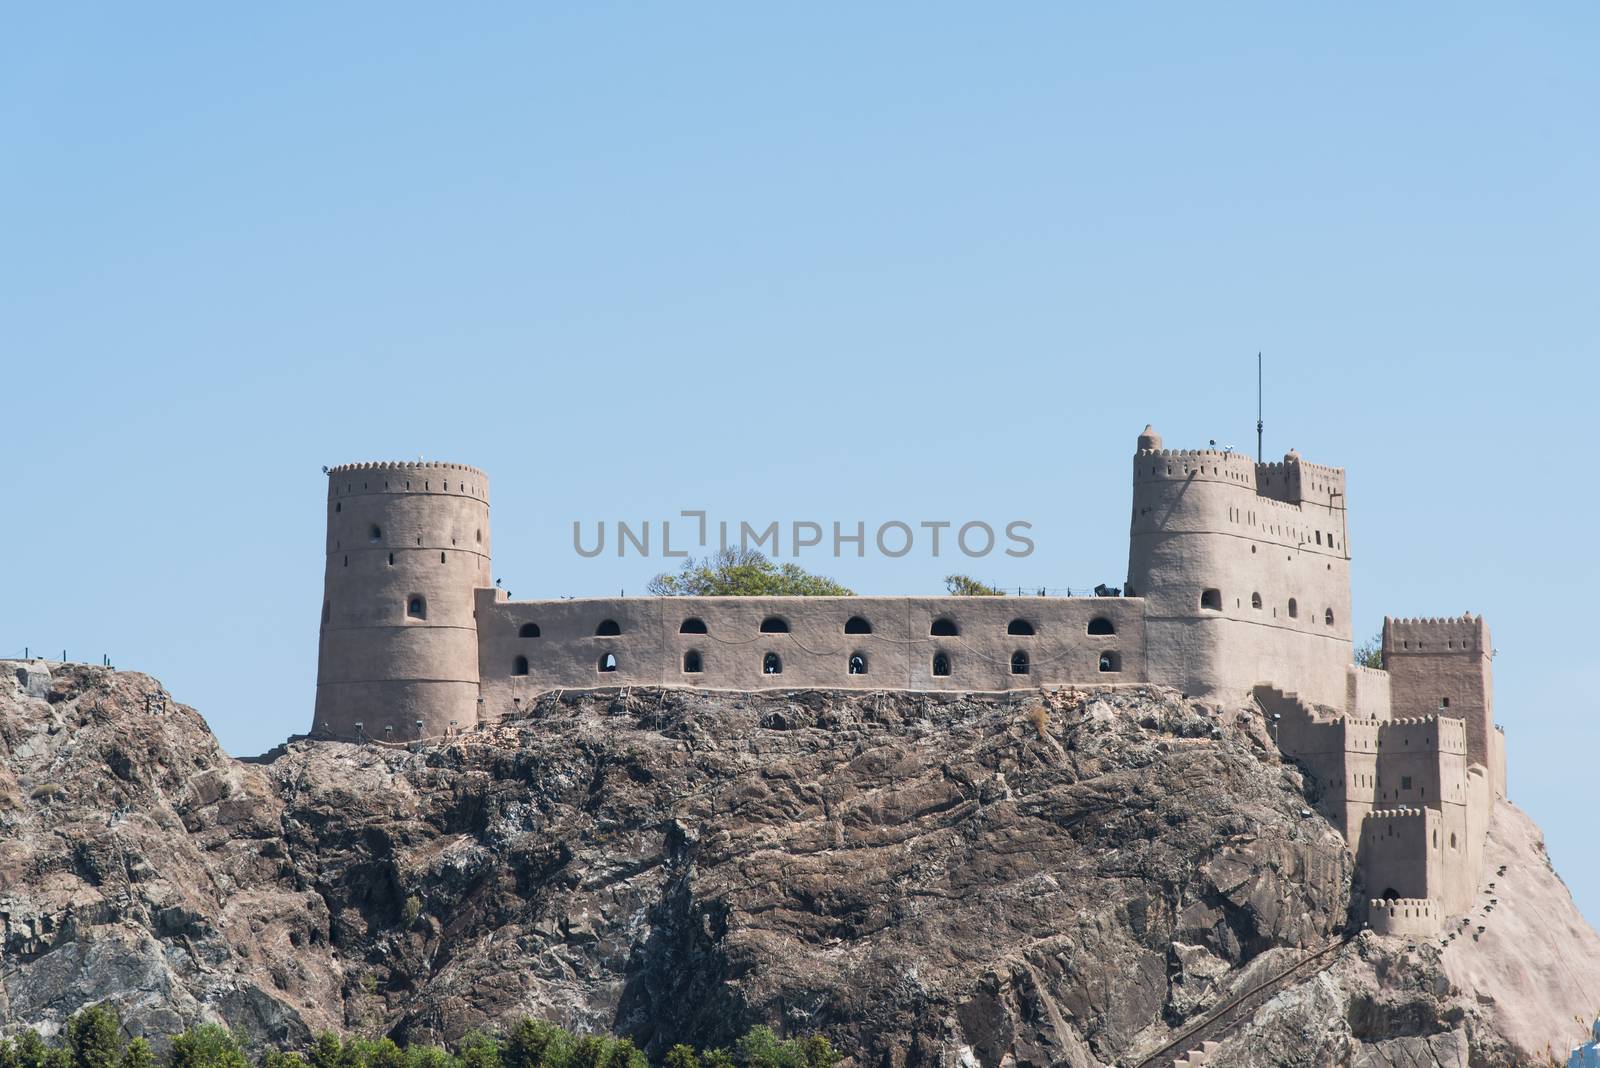 The medieval Fort Al-Jalaili in Muscat, The Sultanate of Oman.